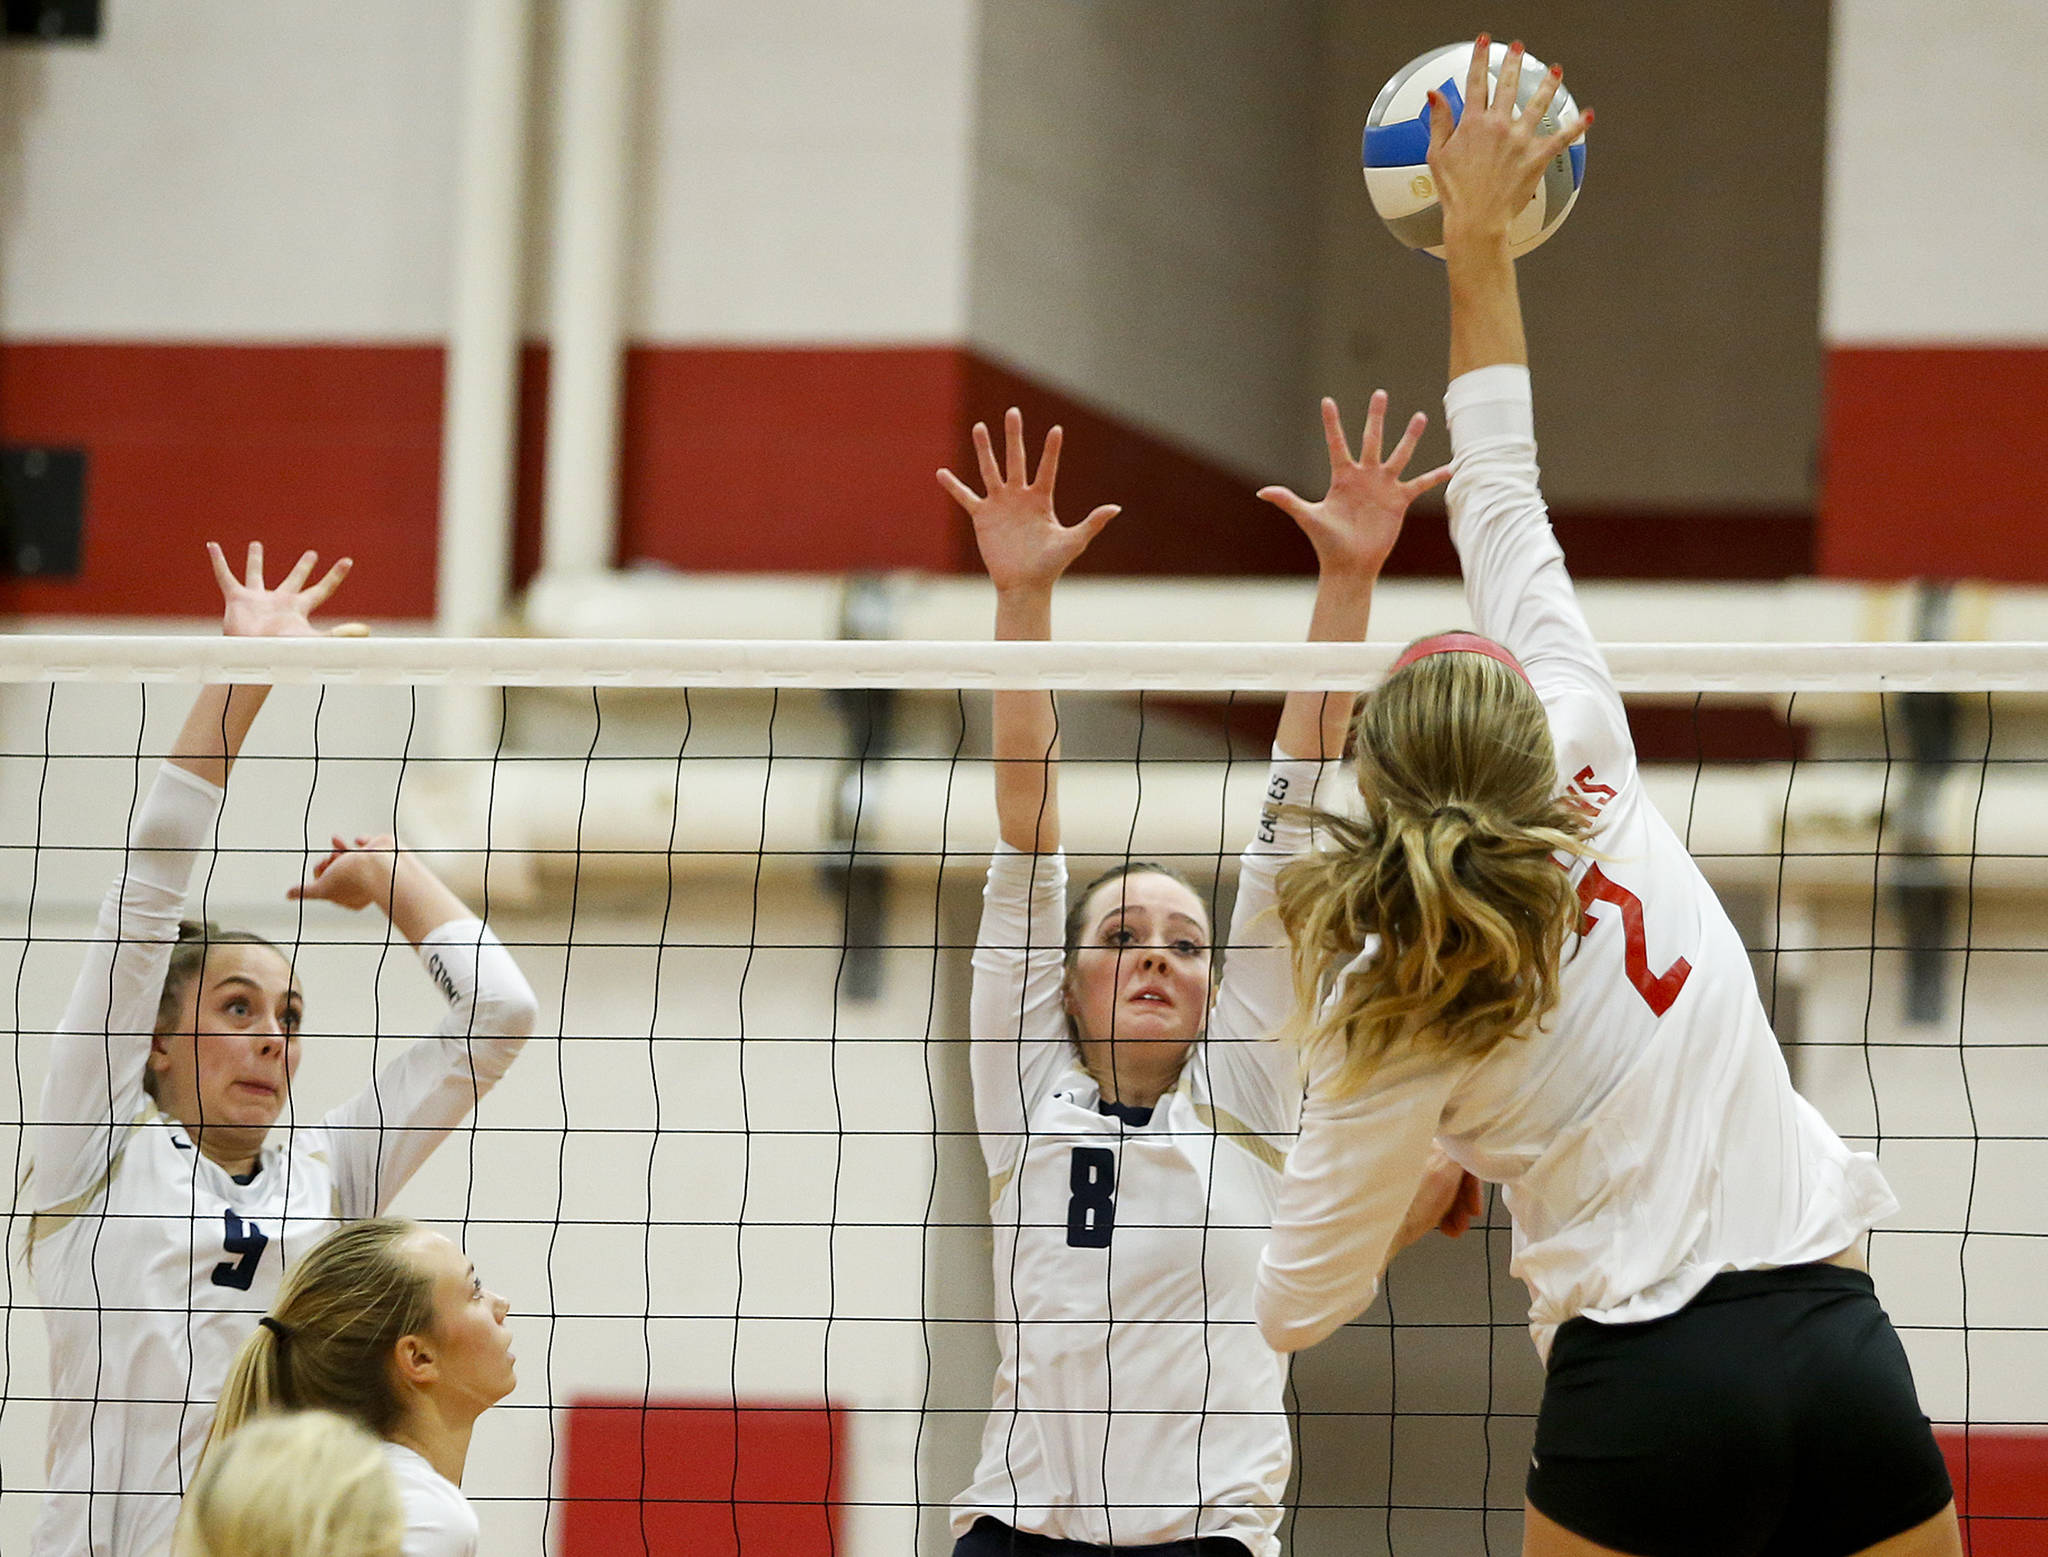 Stanwood’s Jillian Heichel (2) spikes a ball as Arlington’s Sarah Mekelburg (9) and Reese Talbot (8) defend during Tuesday’s match at Stanwood High School. (Ian Terry / The Herald)